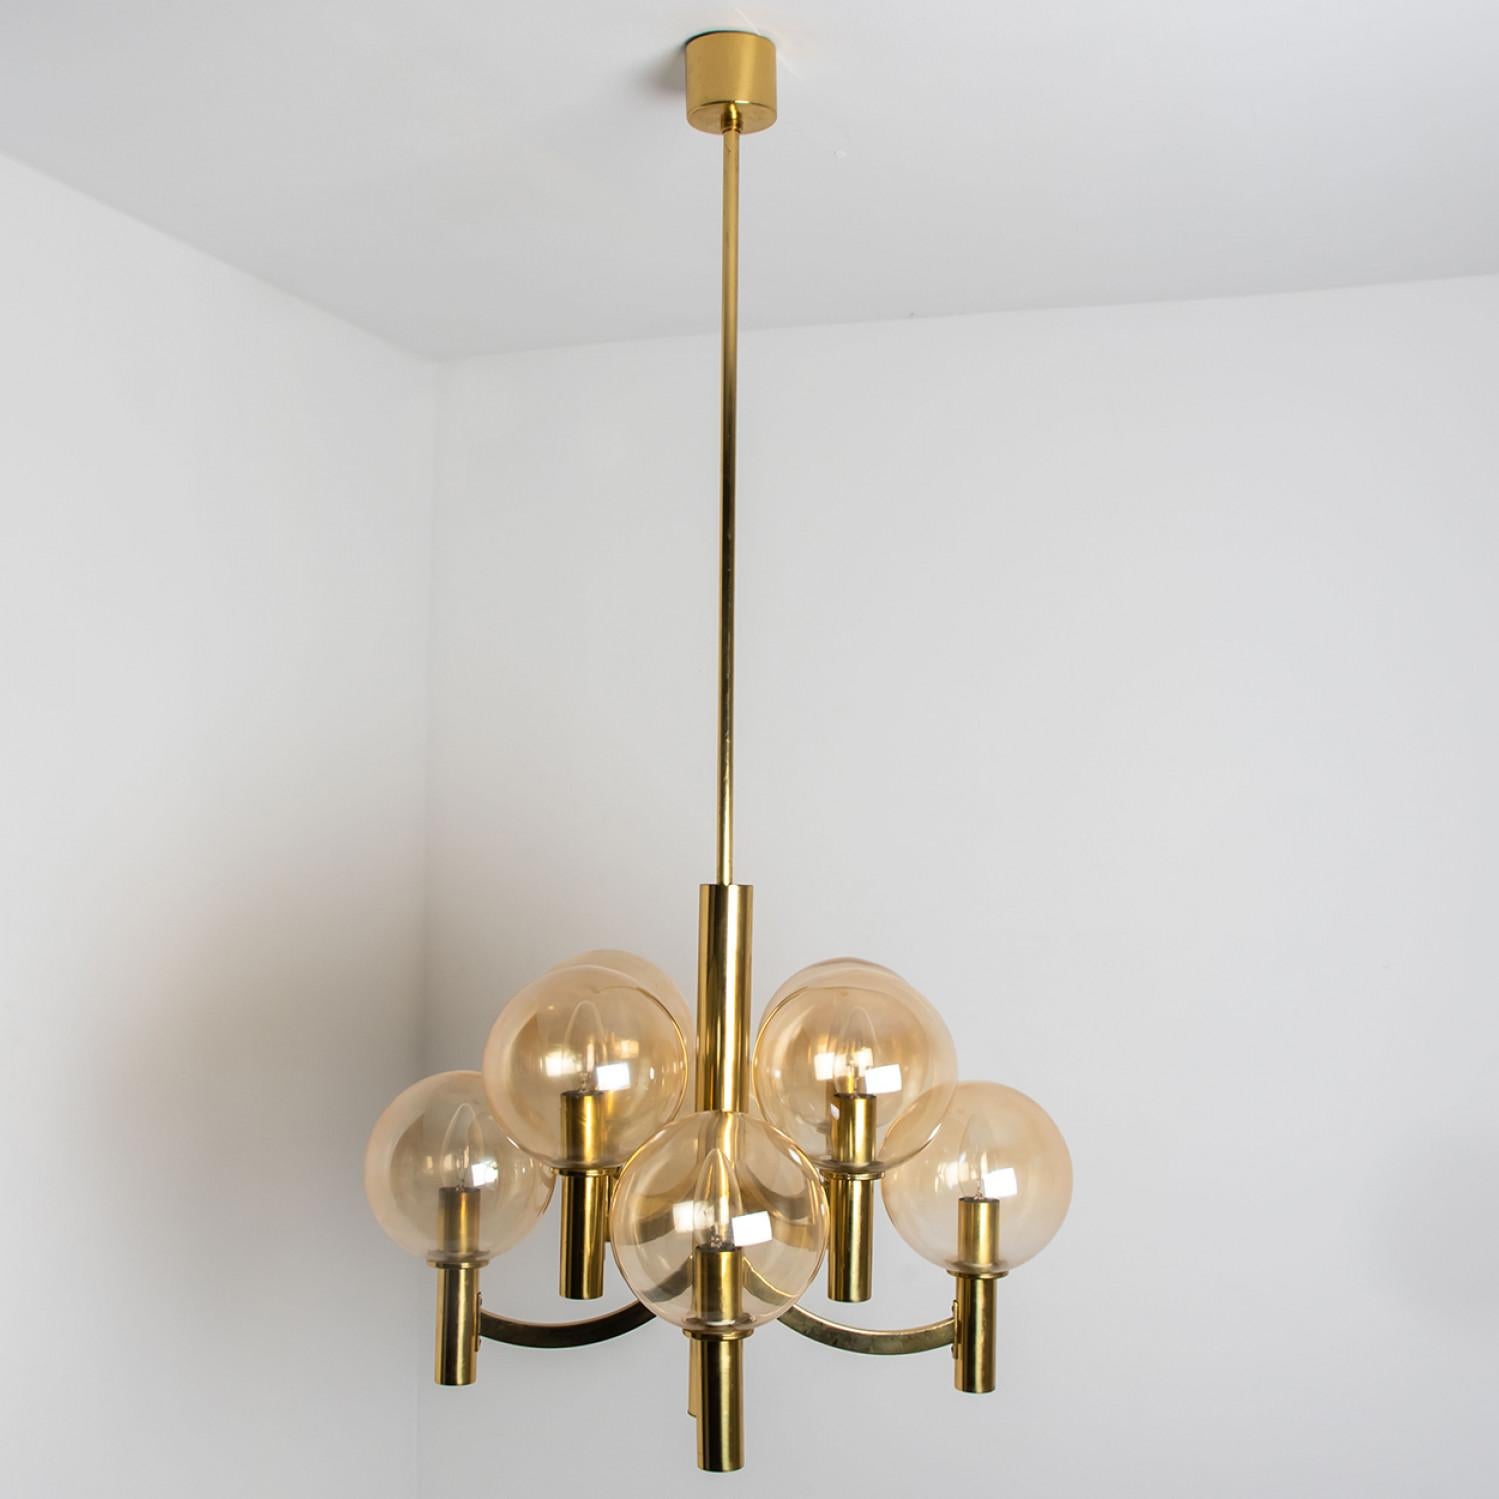 Brass and Clear Glass Chandelier, Jakobsson, 1970s For Sale 1